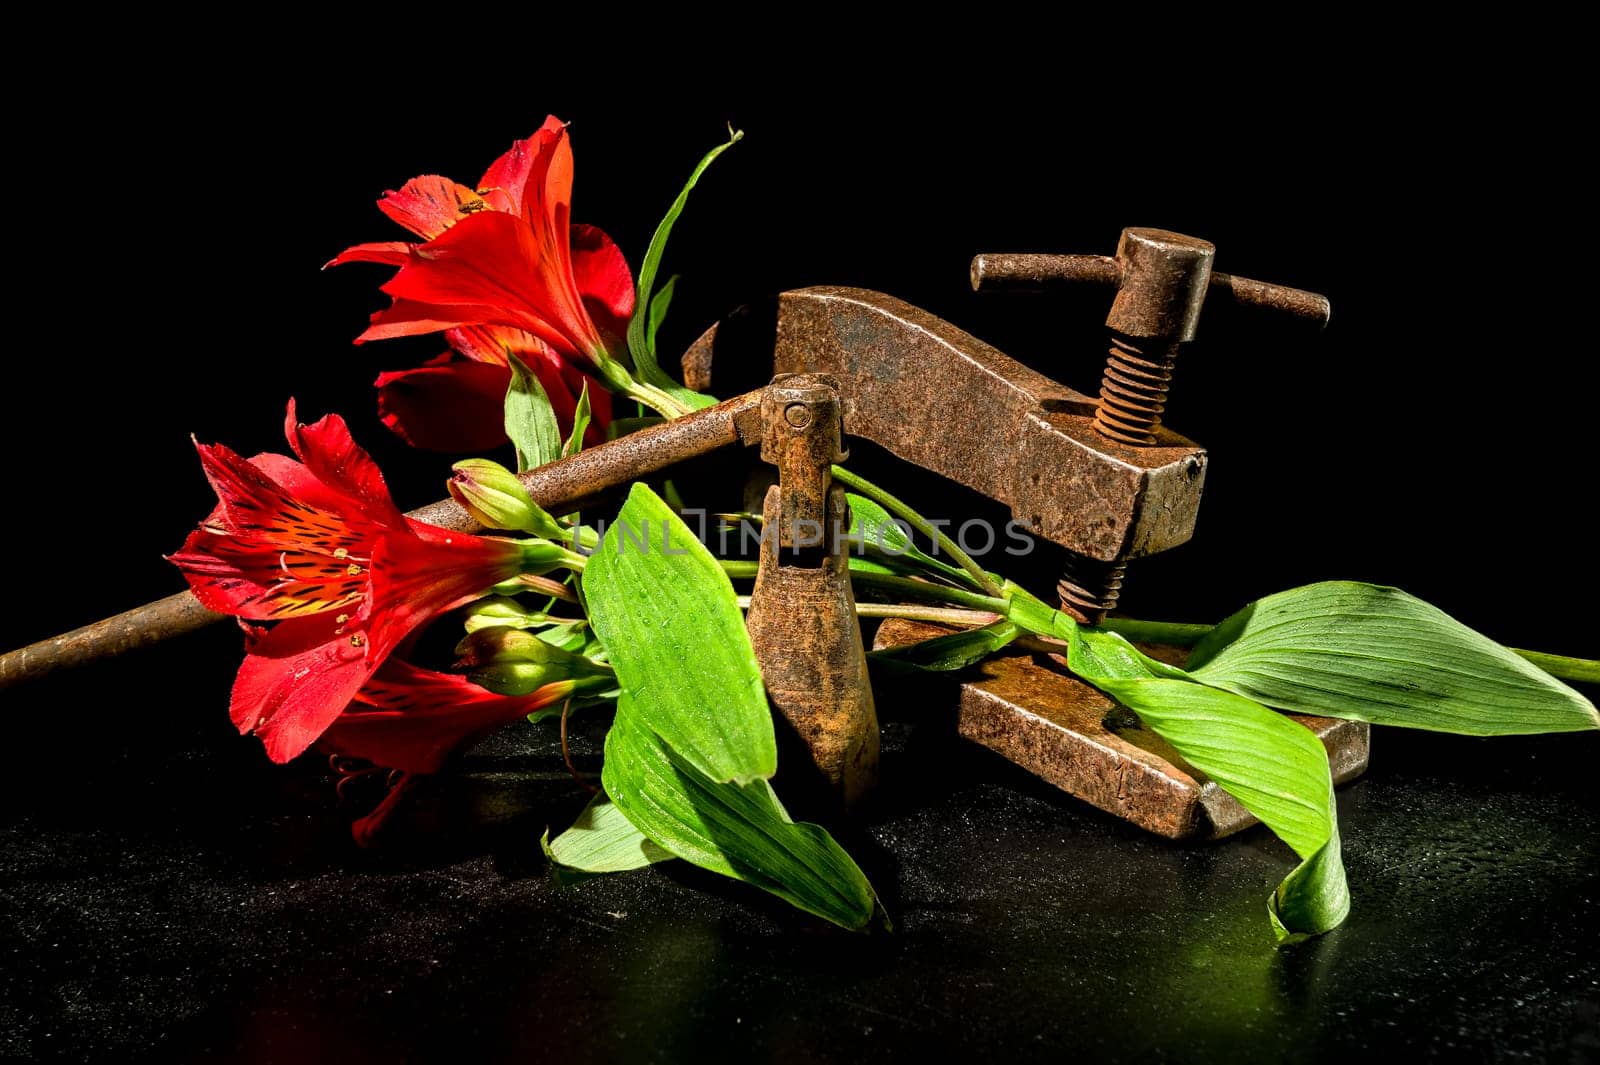 Creative still life with old rusty metal clamp and red Alstroemeria flower on a black background